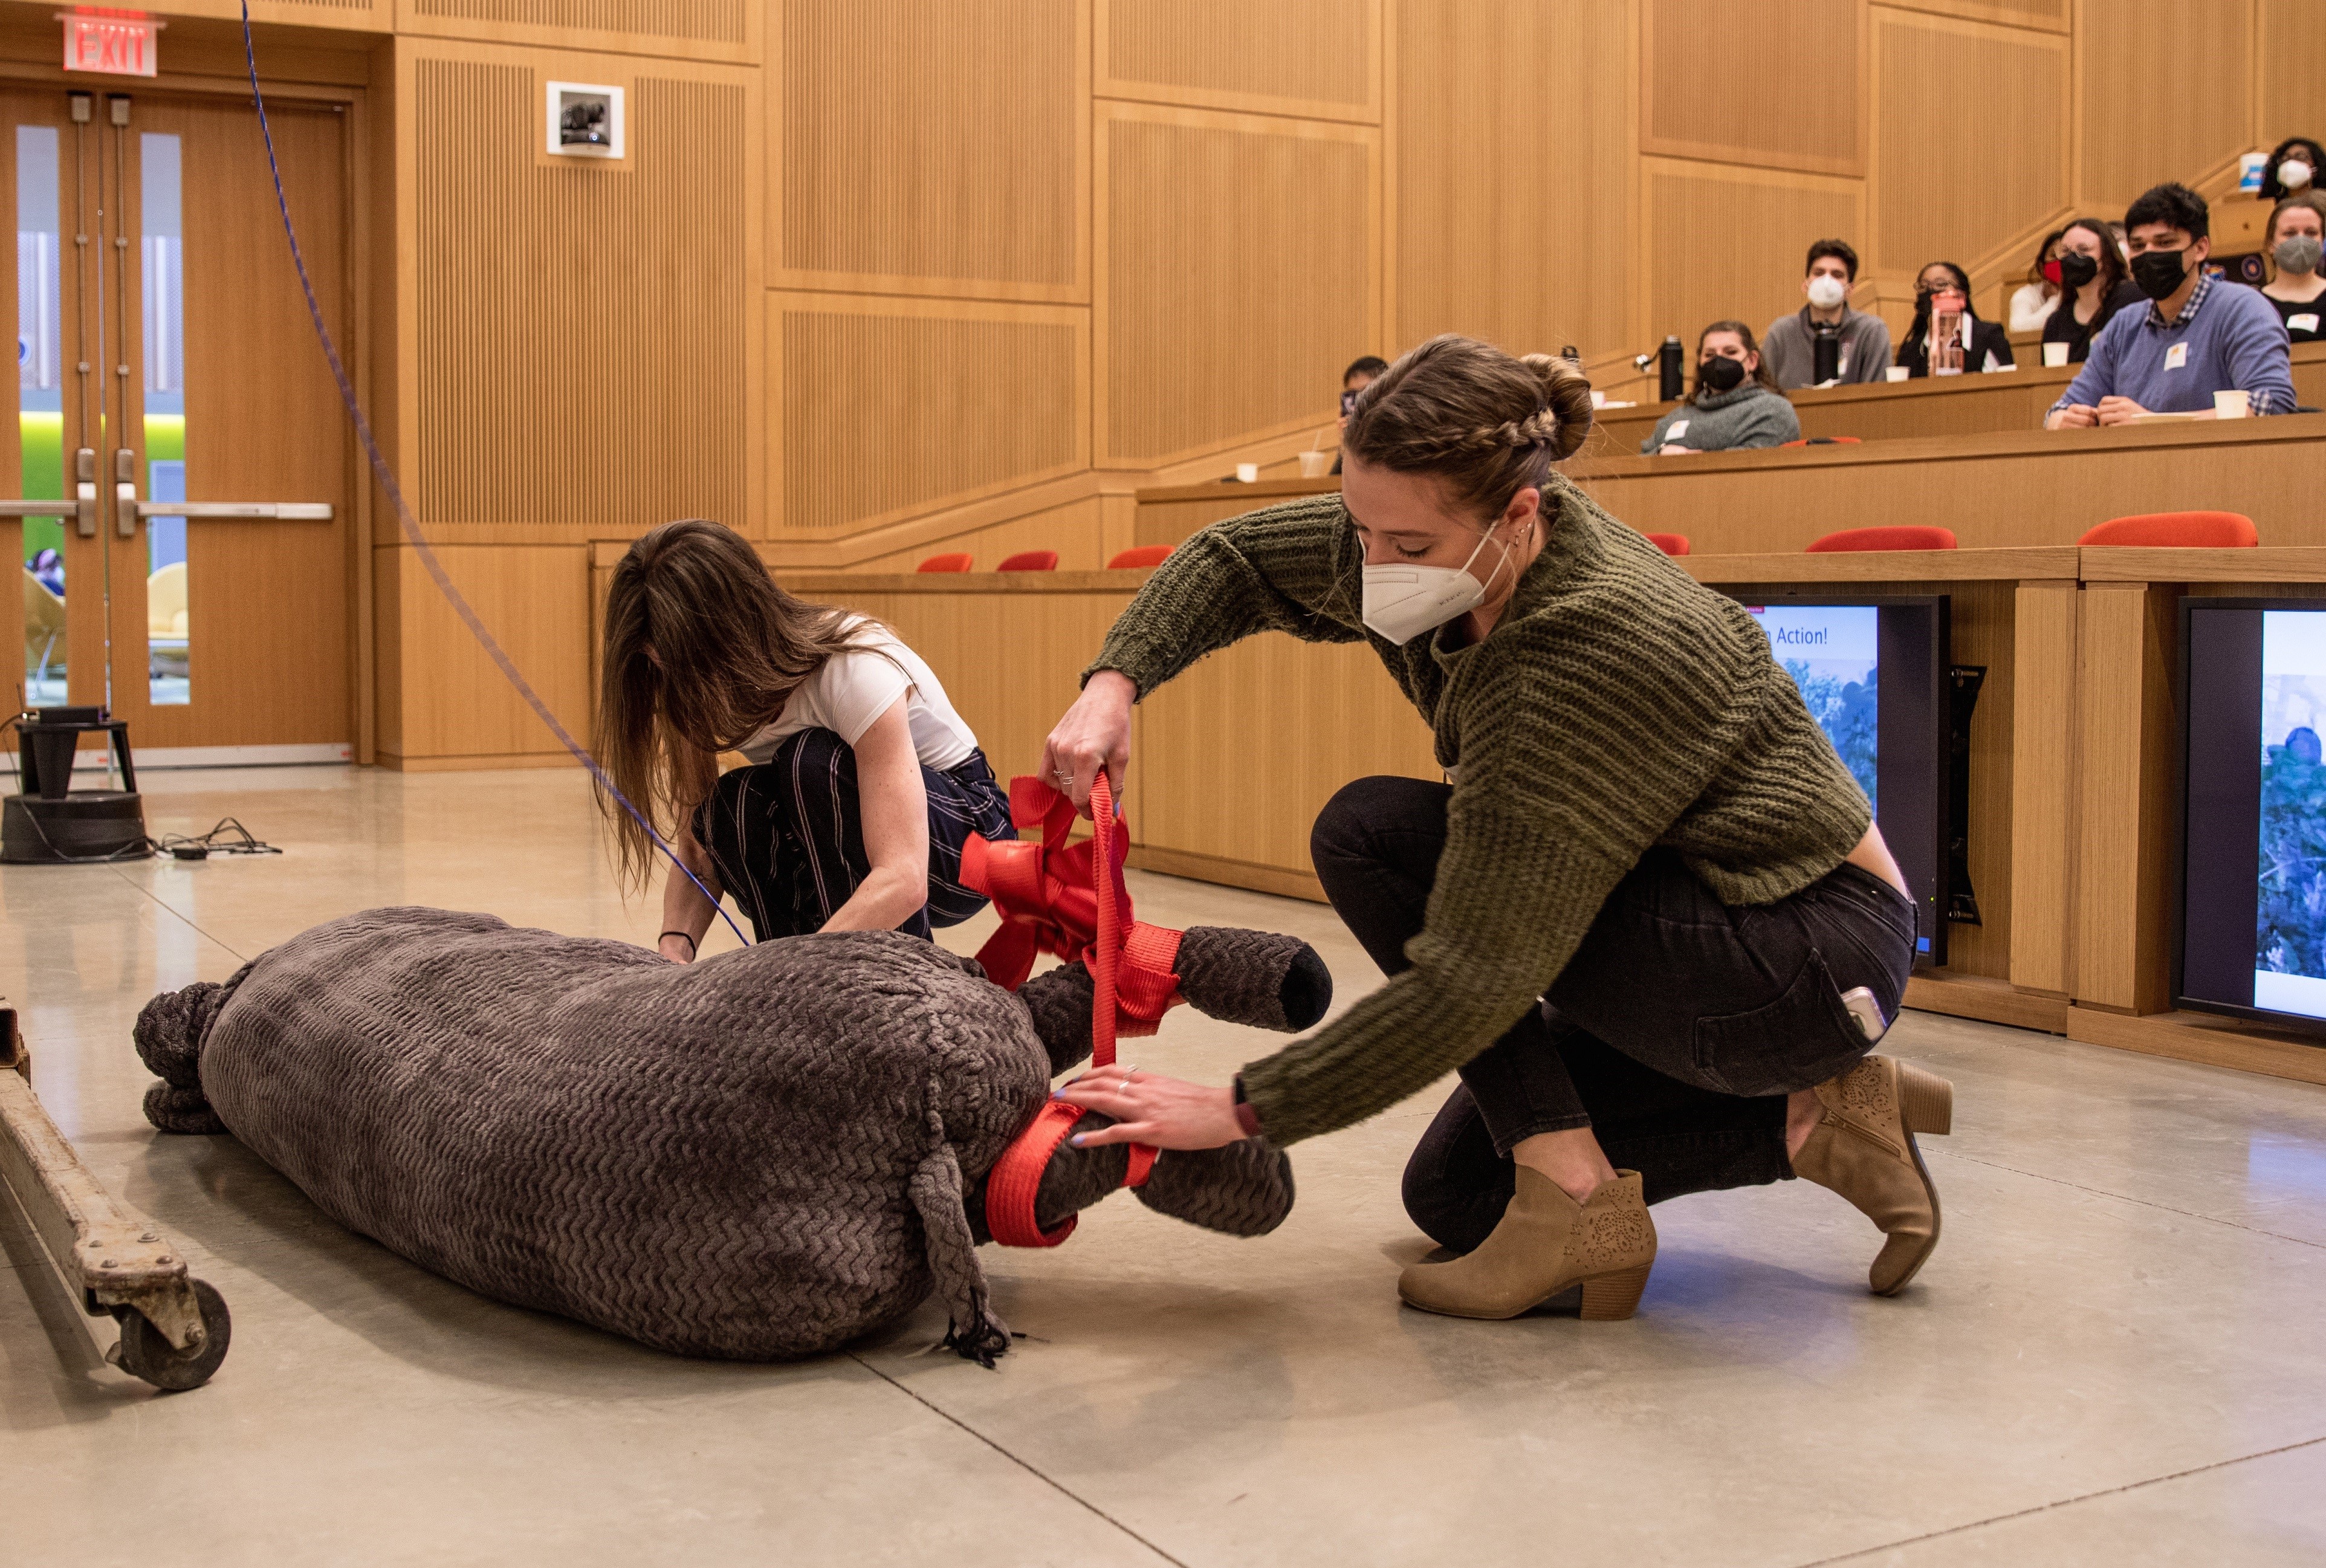 Students at the ZAWS symposium involved in Rhino transport demo